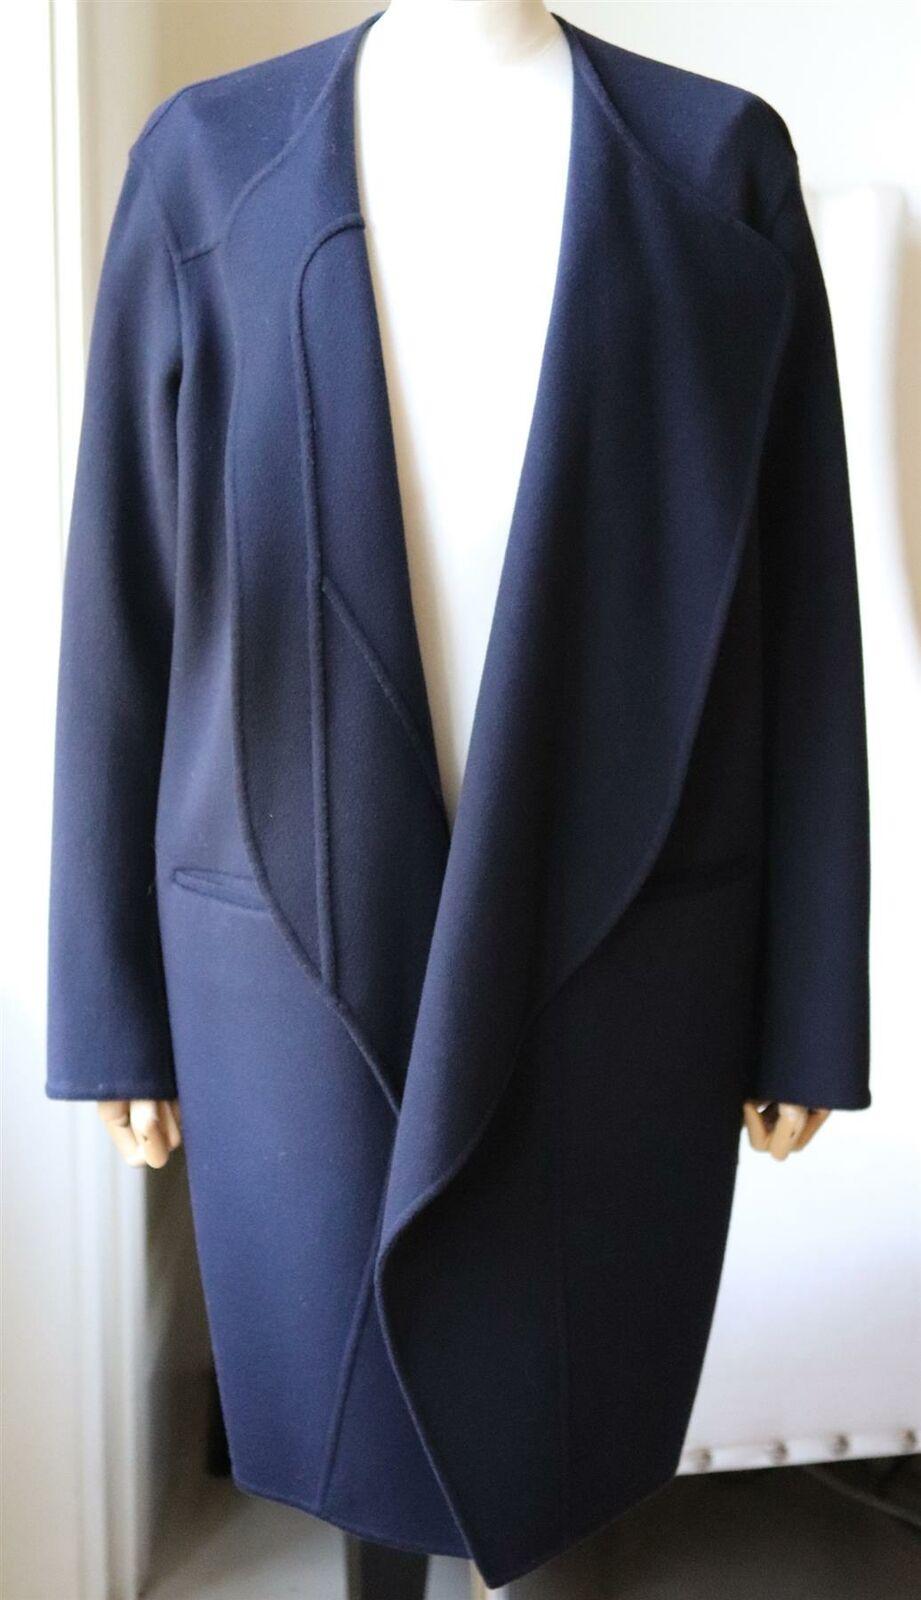 This Céline by Phoebe Philo coat has been made from wool with hints of soft cashmere, the oversized silhouette has large lapels and pockets.
Navy wool and cashmere-blend. 
Slips on.
90% Wool, 10% cashmere; lining: 100% cupro.
Size: FR 40 (UK 12, US